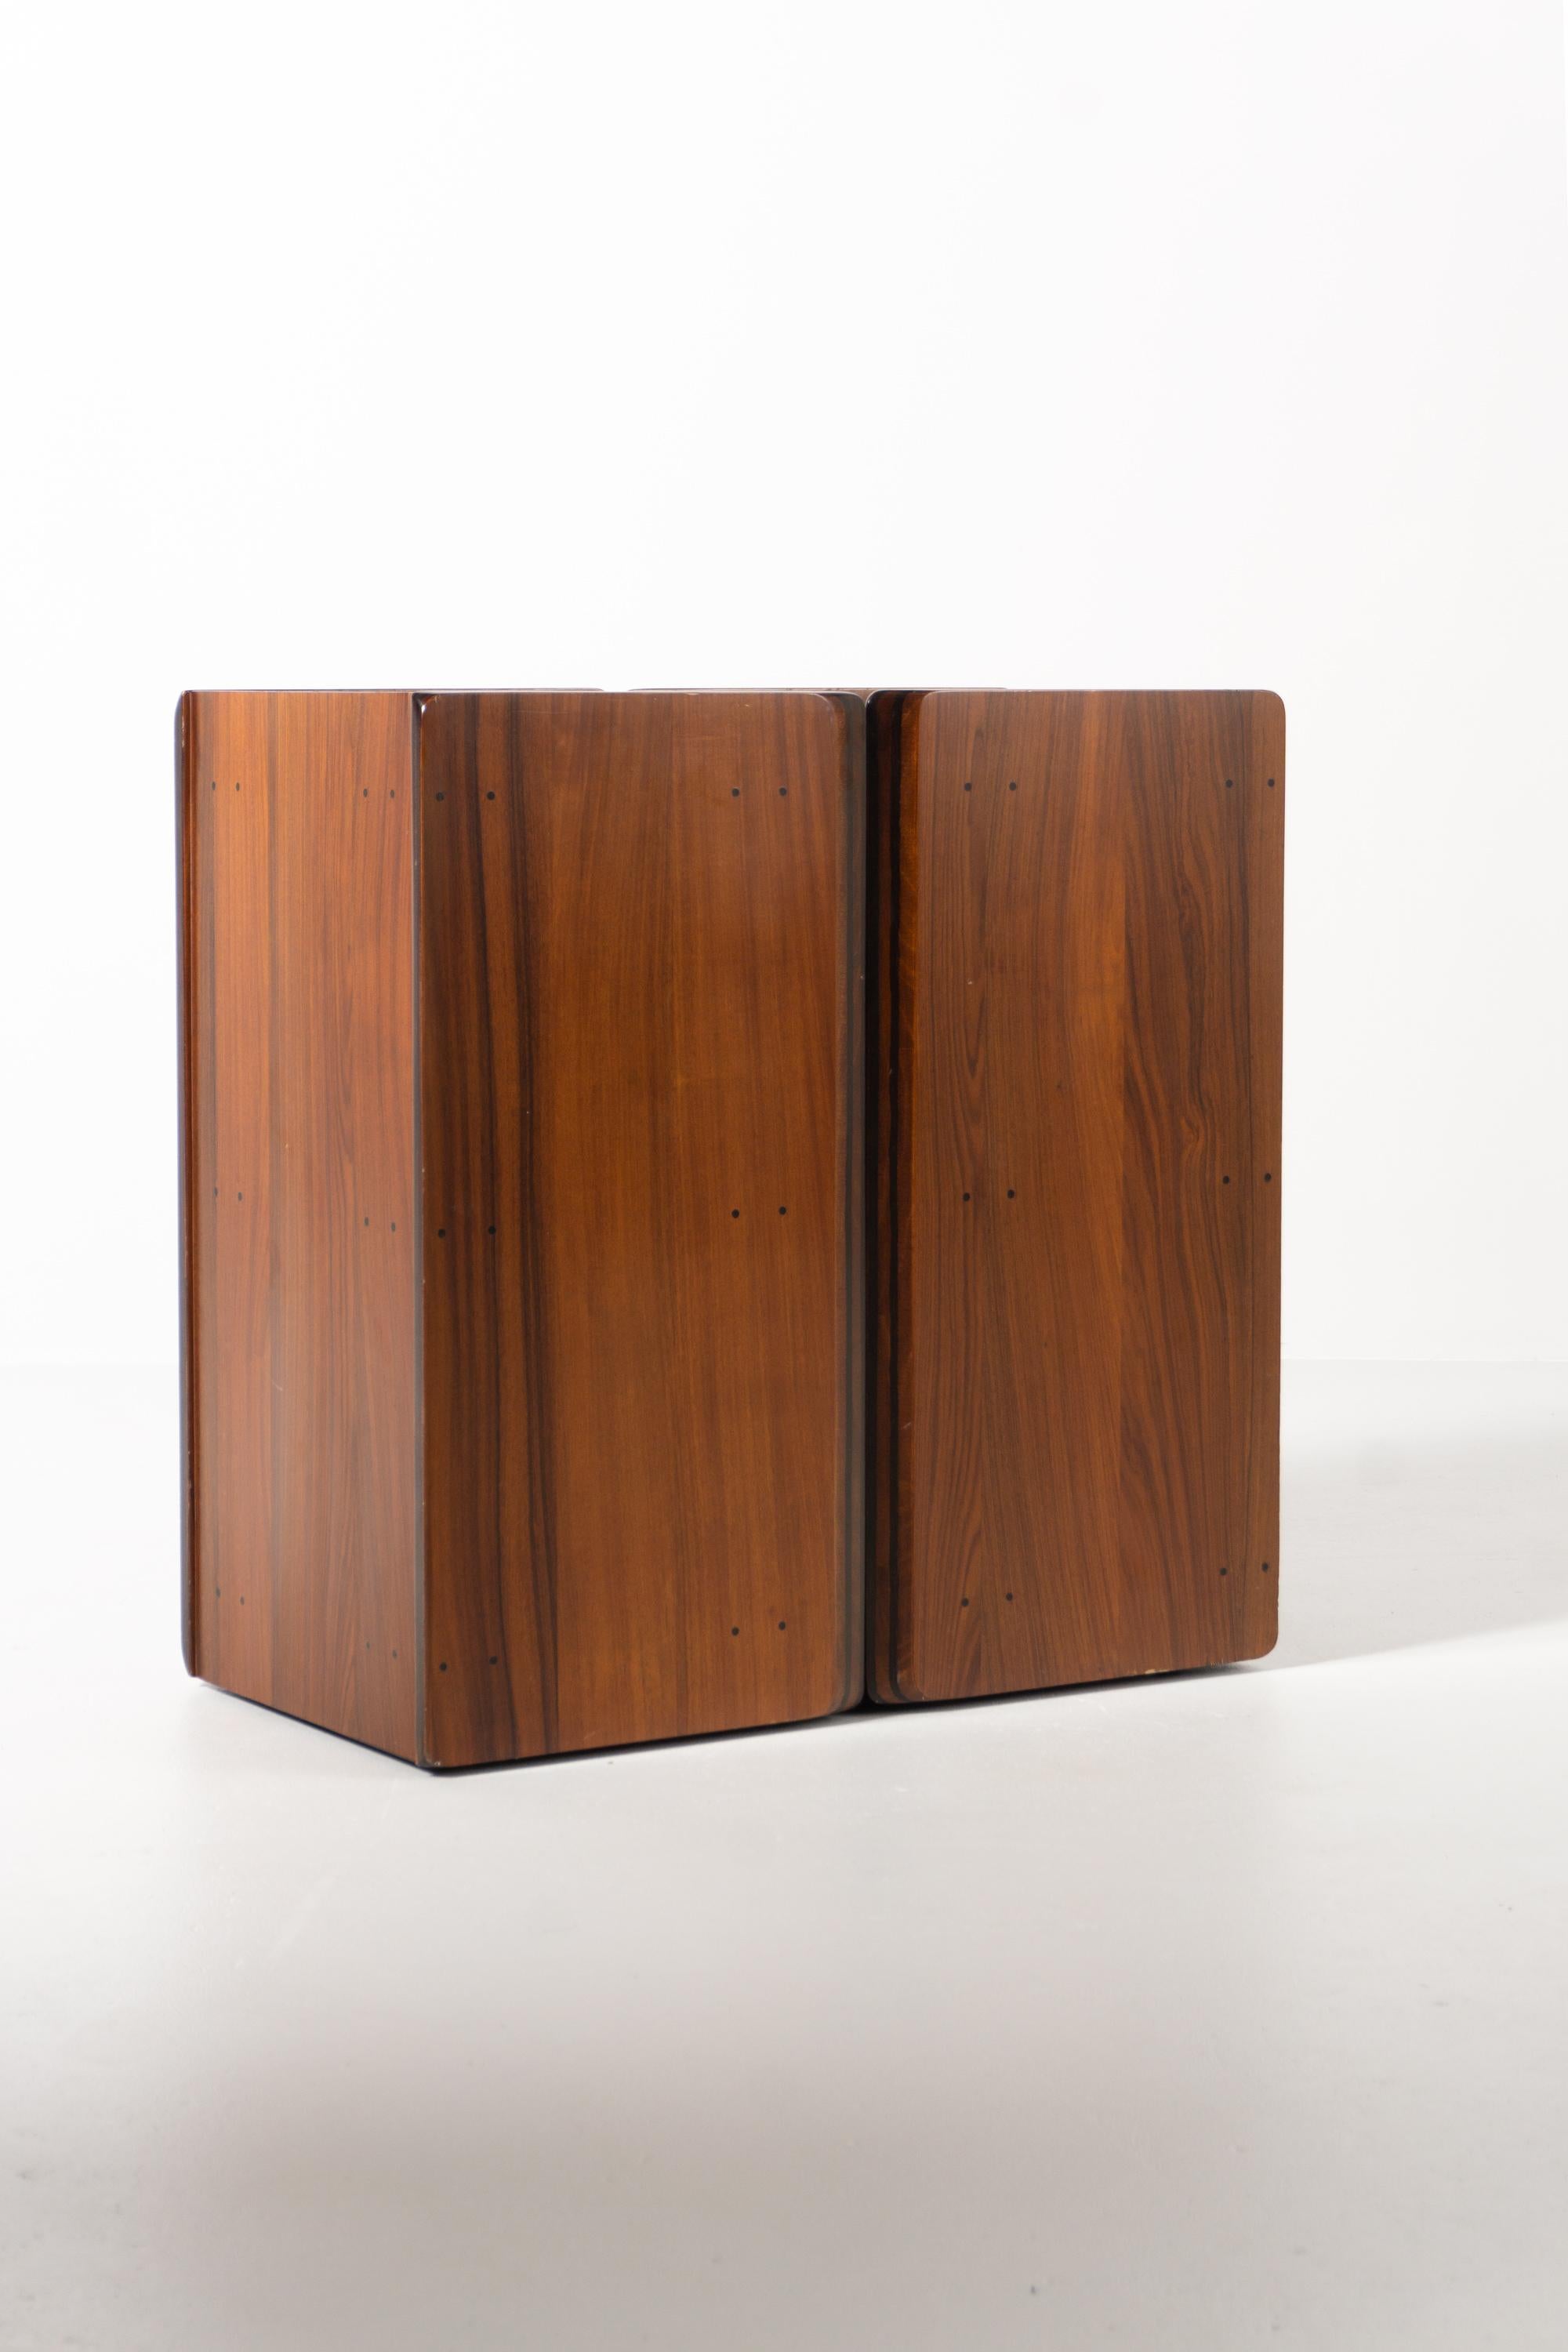 Rosewood Two Cabinets on Rollers, Model 'Artona' by Afra and Tobia Scarpa, 1975 For Sale